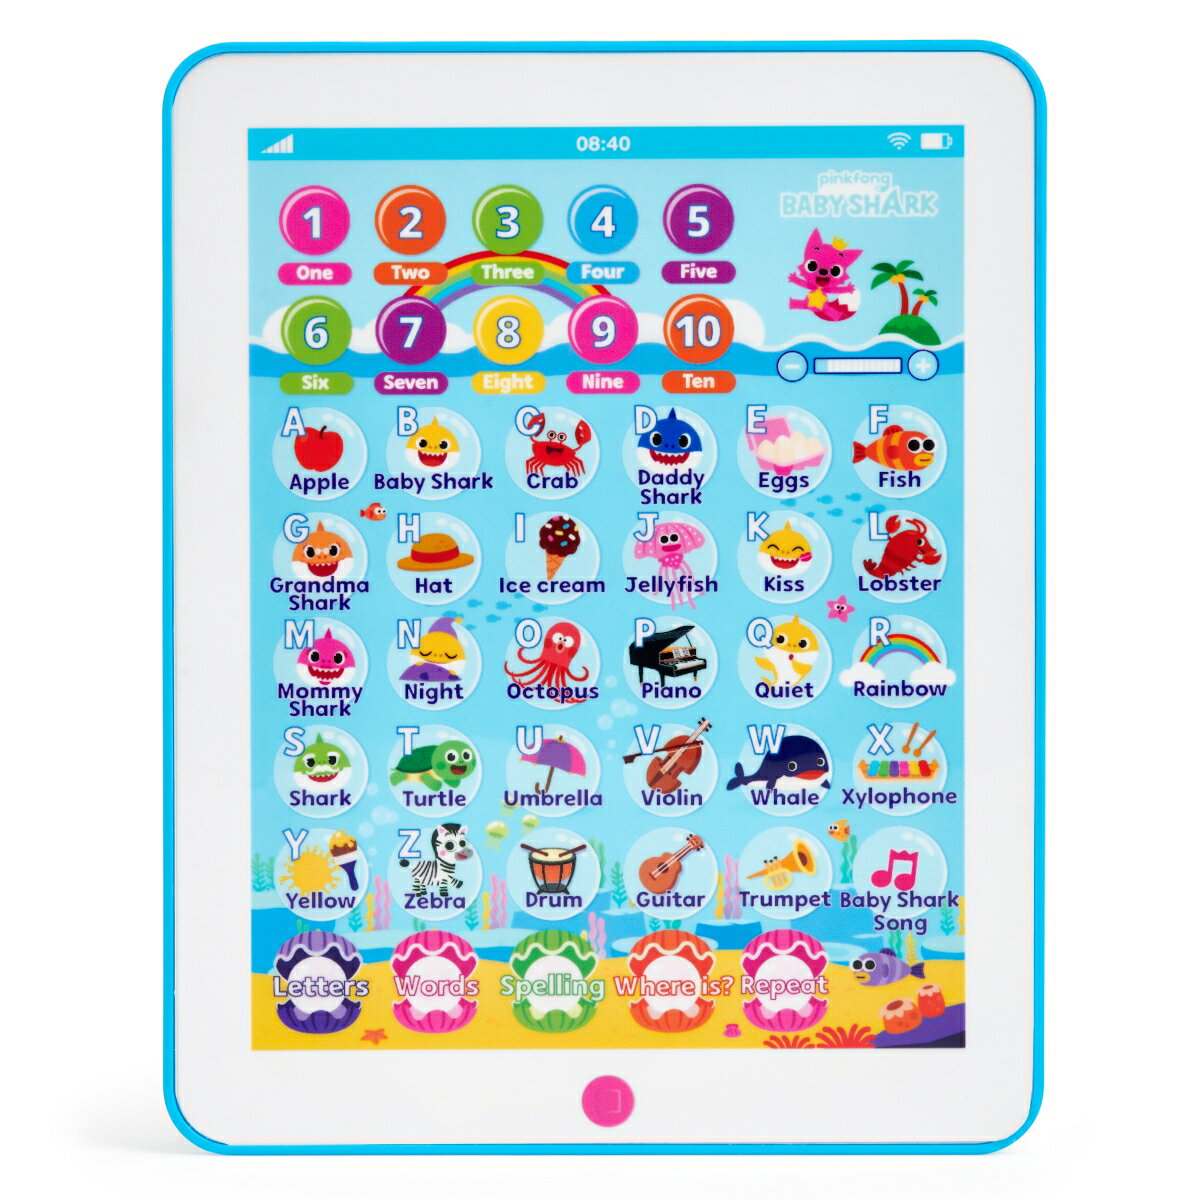 BABY SHARK Tablet BS タブレットでABC！の画像